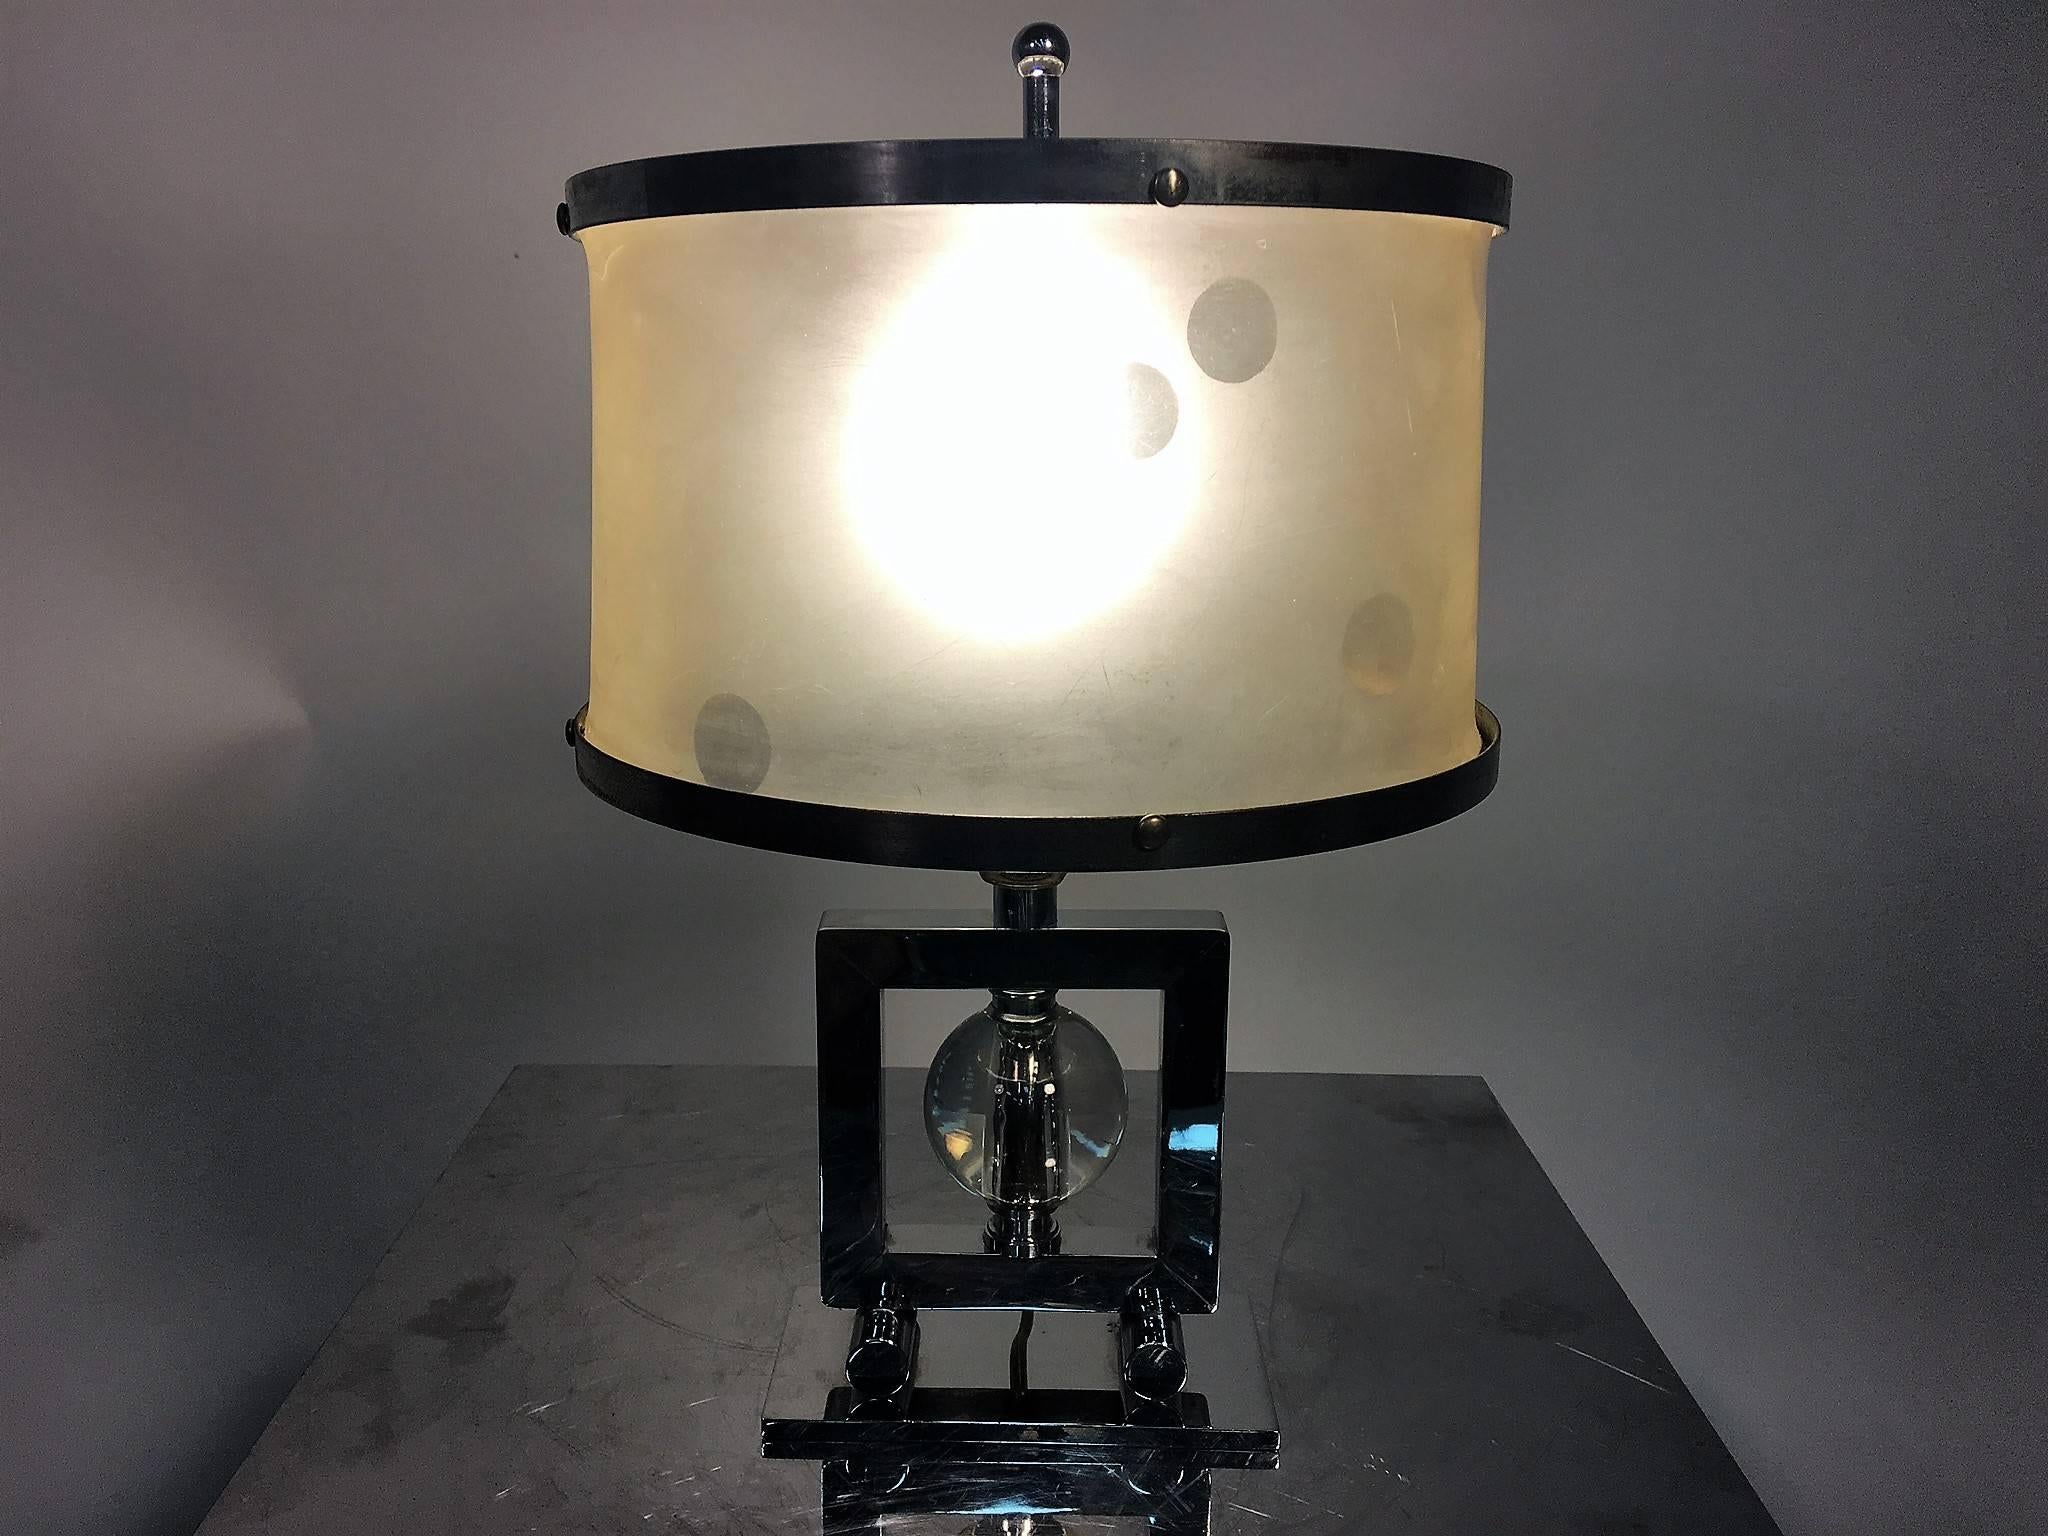 Beautiful chromium on brass geometric design Art Deco lamp with glass ball in center in a square tubular frame resting on Tootsie roll feet on a rectangular base. Retaining the dotted translucent white vellum shade trimmed with chrome trim and great